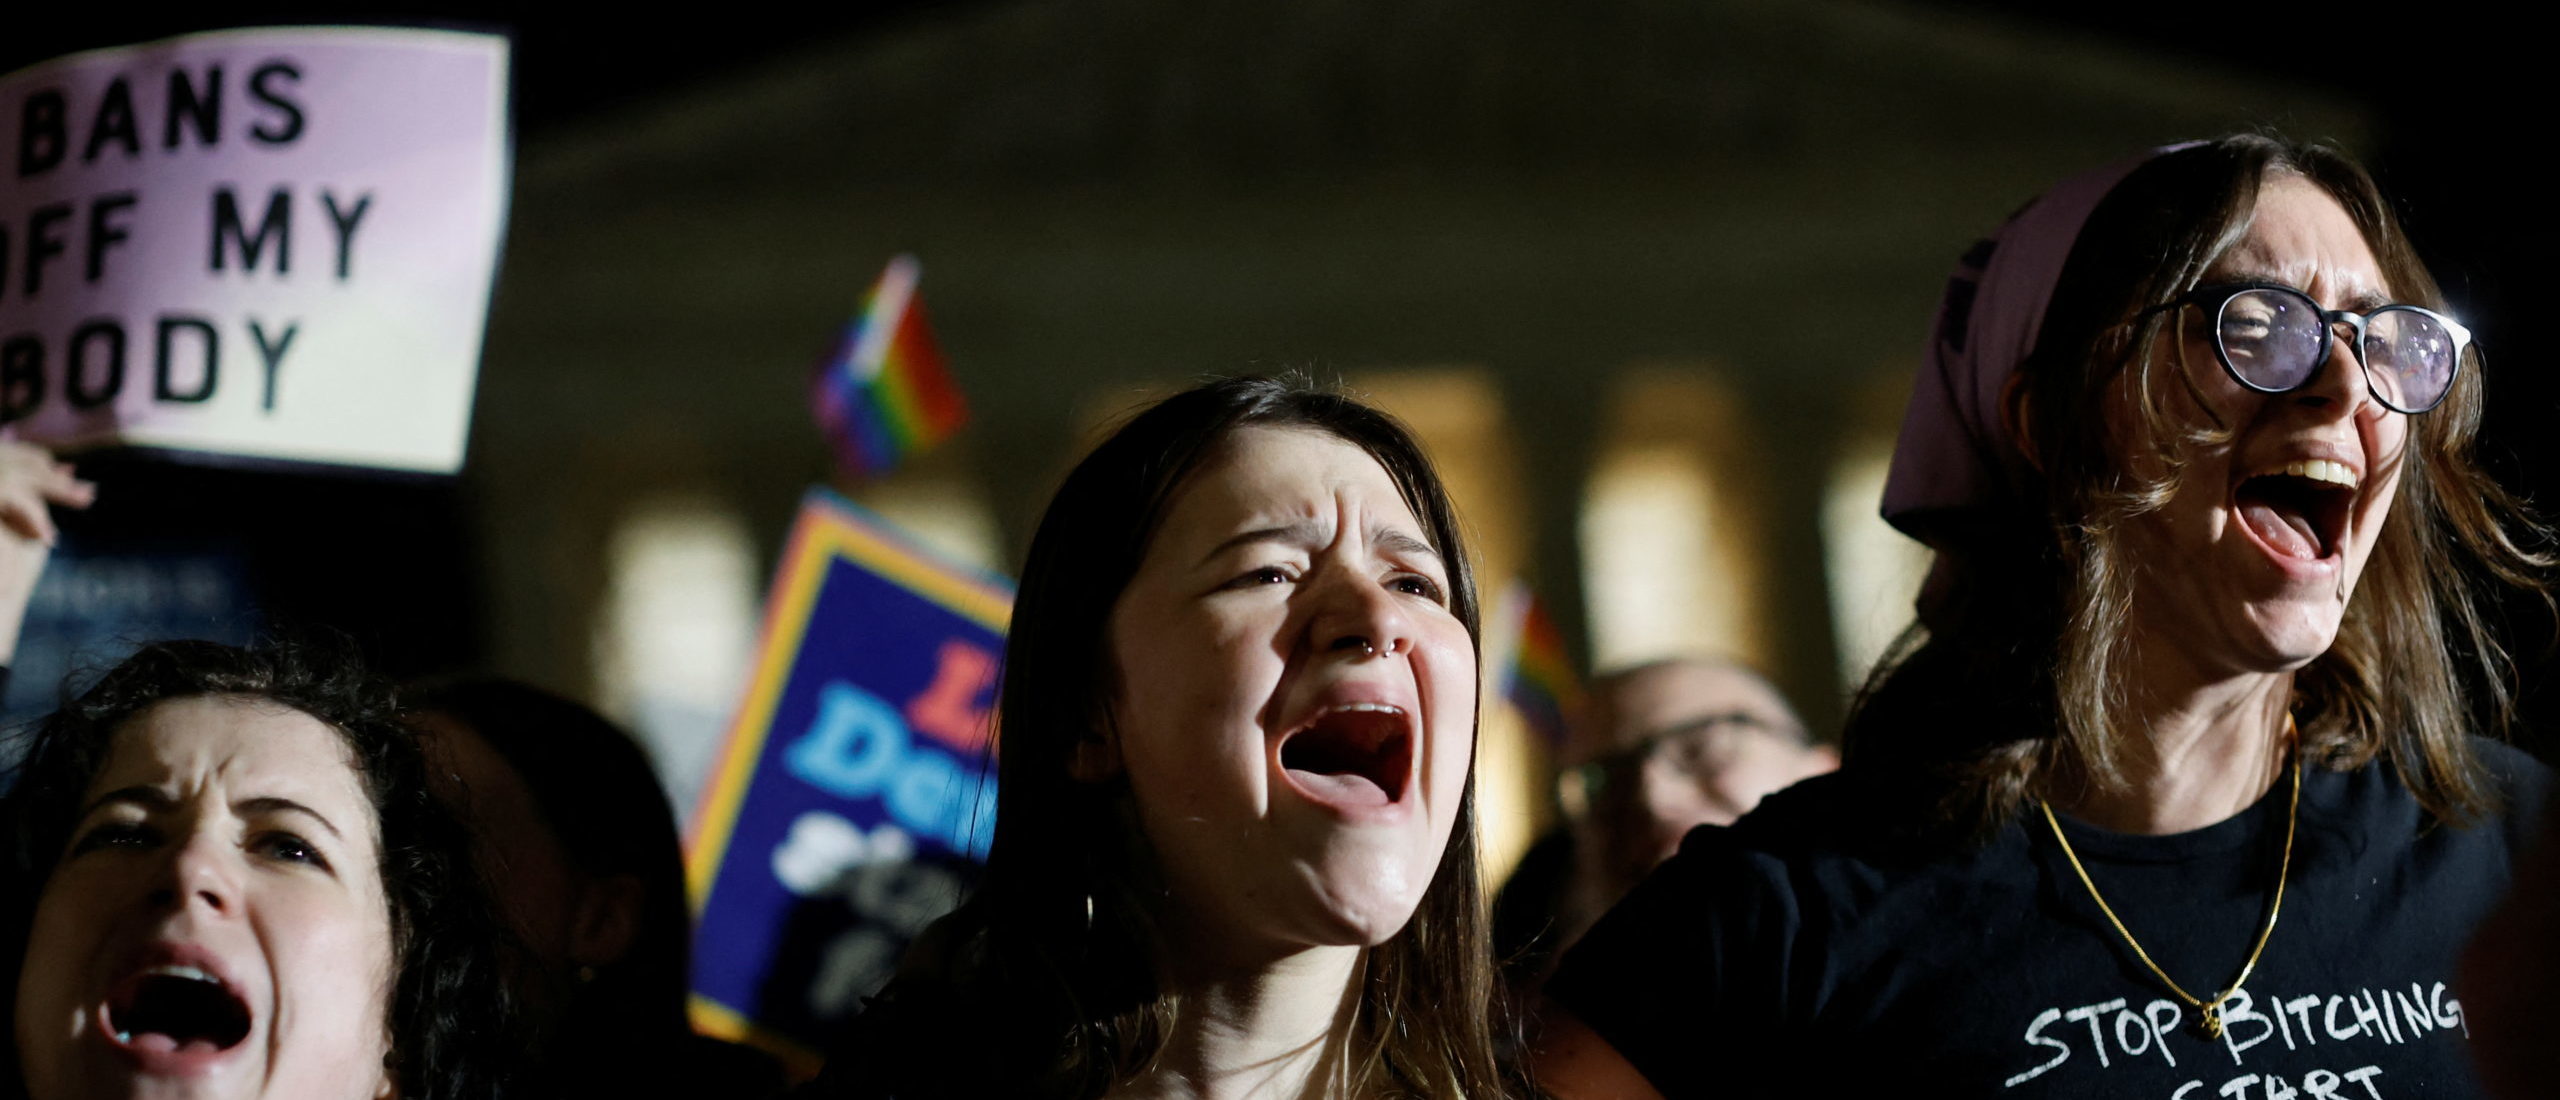 Pro-abortion rights protesters react outside the U.S. Supreme Court after the leak of a draft majority opinion written by Justice Samuel Alito preparing for a majority of the court to overturn the landmark Roe v. Wade abortion rights decision later this year, in Washington, U.S., May 2, 2022.